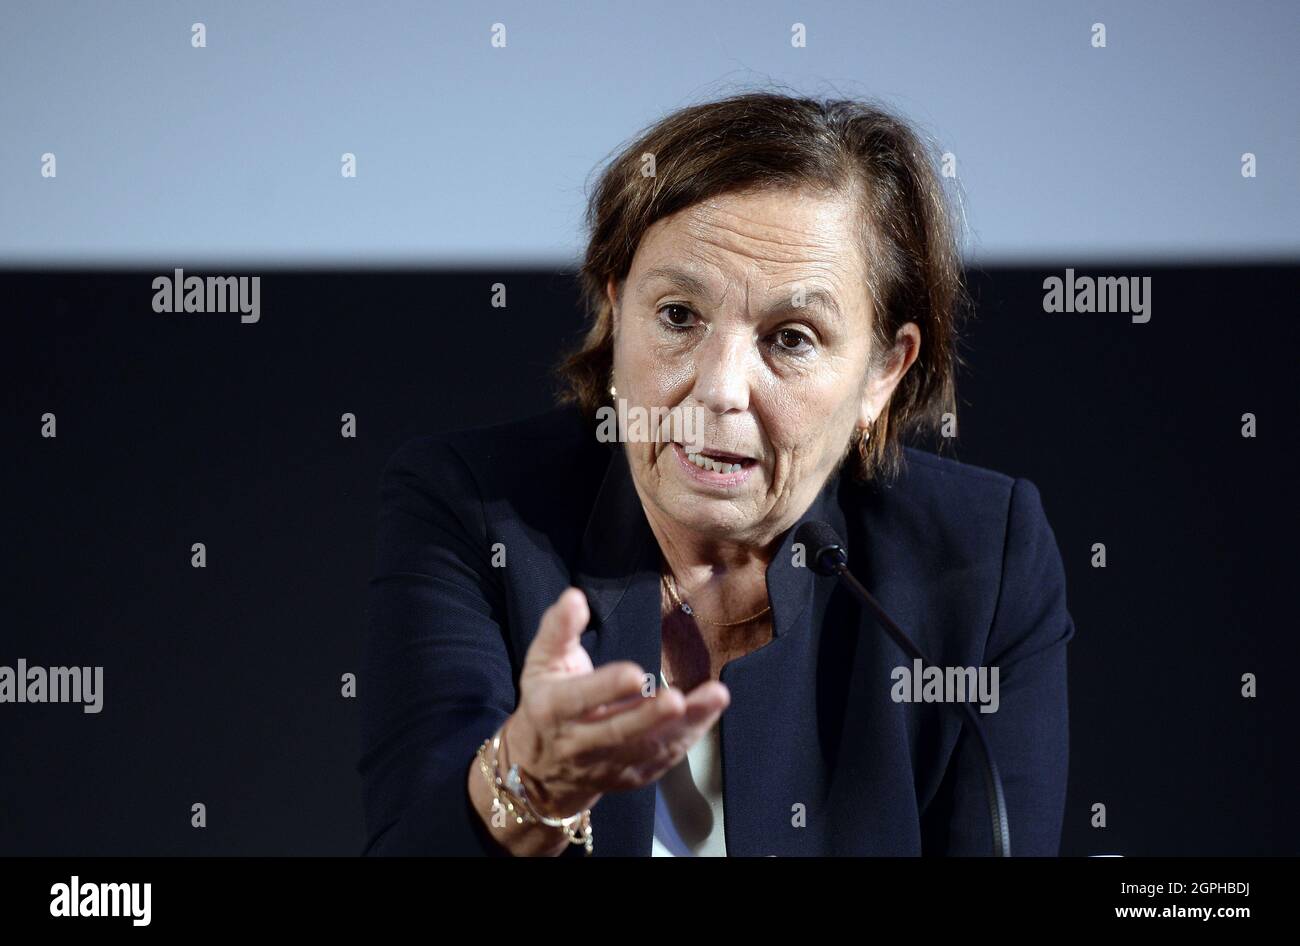 Rome, Italy. 29th Sep, 2021. Rome 29/09/2021 The Minister of the Interior Luciana Lamorgese at the Festival of the Cities organized by ALI (Italian Local Autonomies) Credit: Independent Photo Agency/Alamy Live News Stock Photo